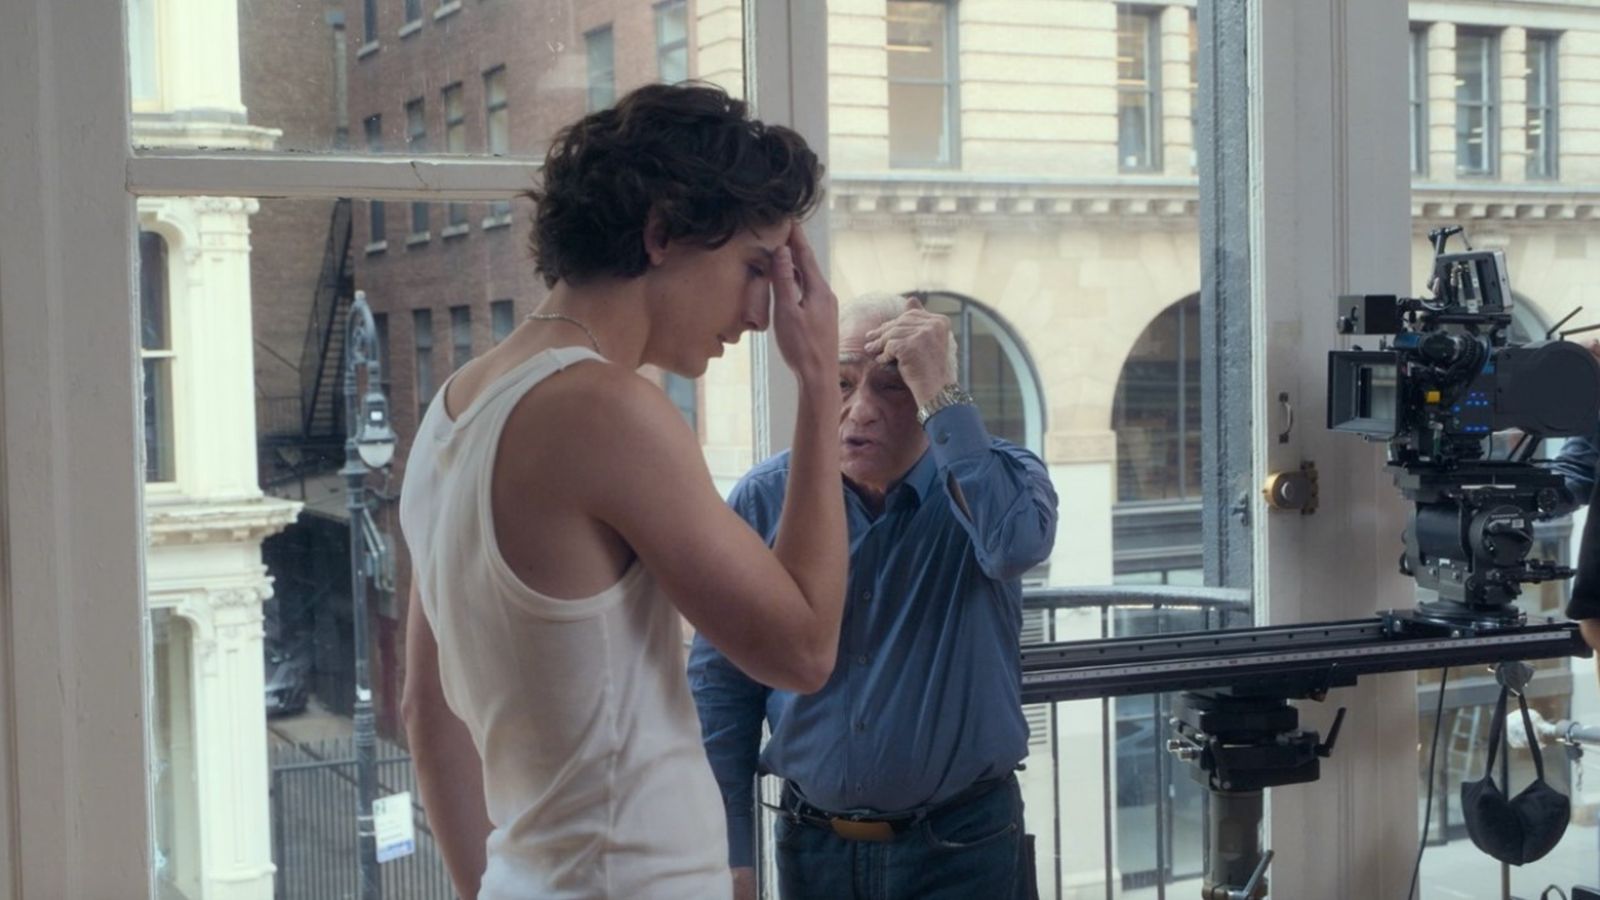 Timothée Chalamet and Martin Scorsese: behind-the-scenes photos of the Bleu de Chanel campaign